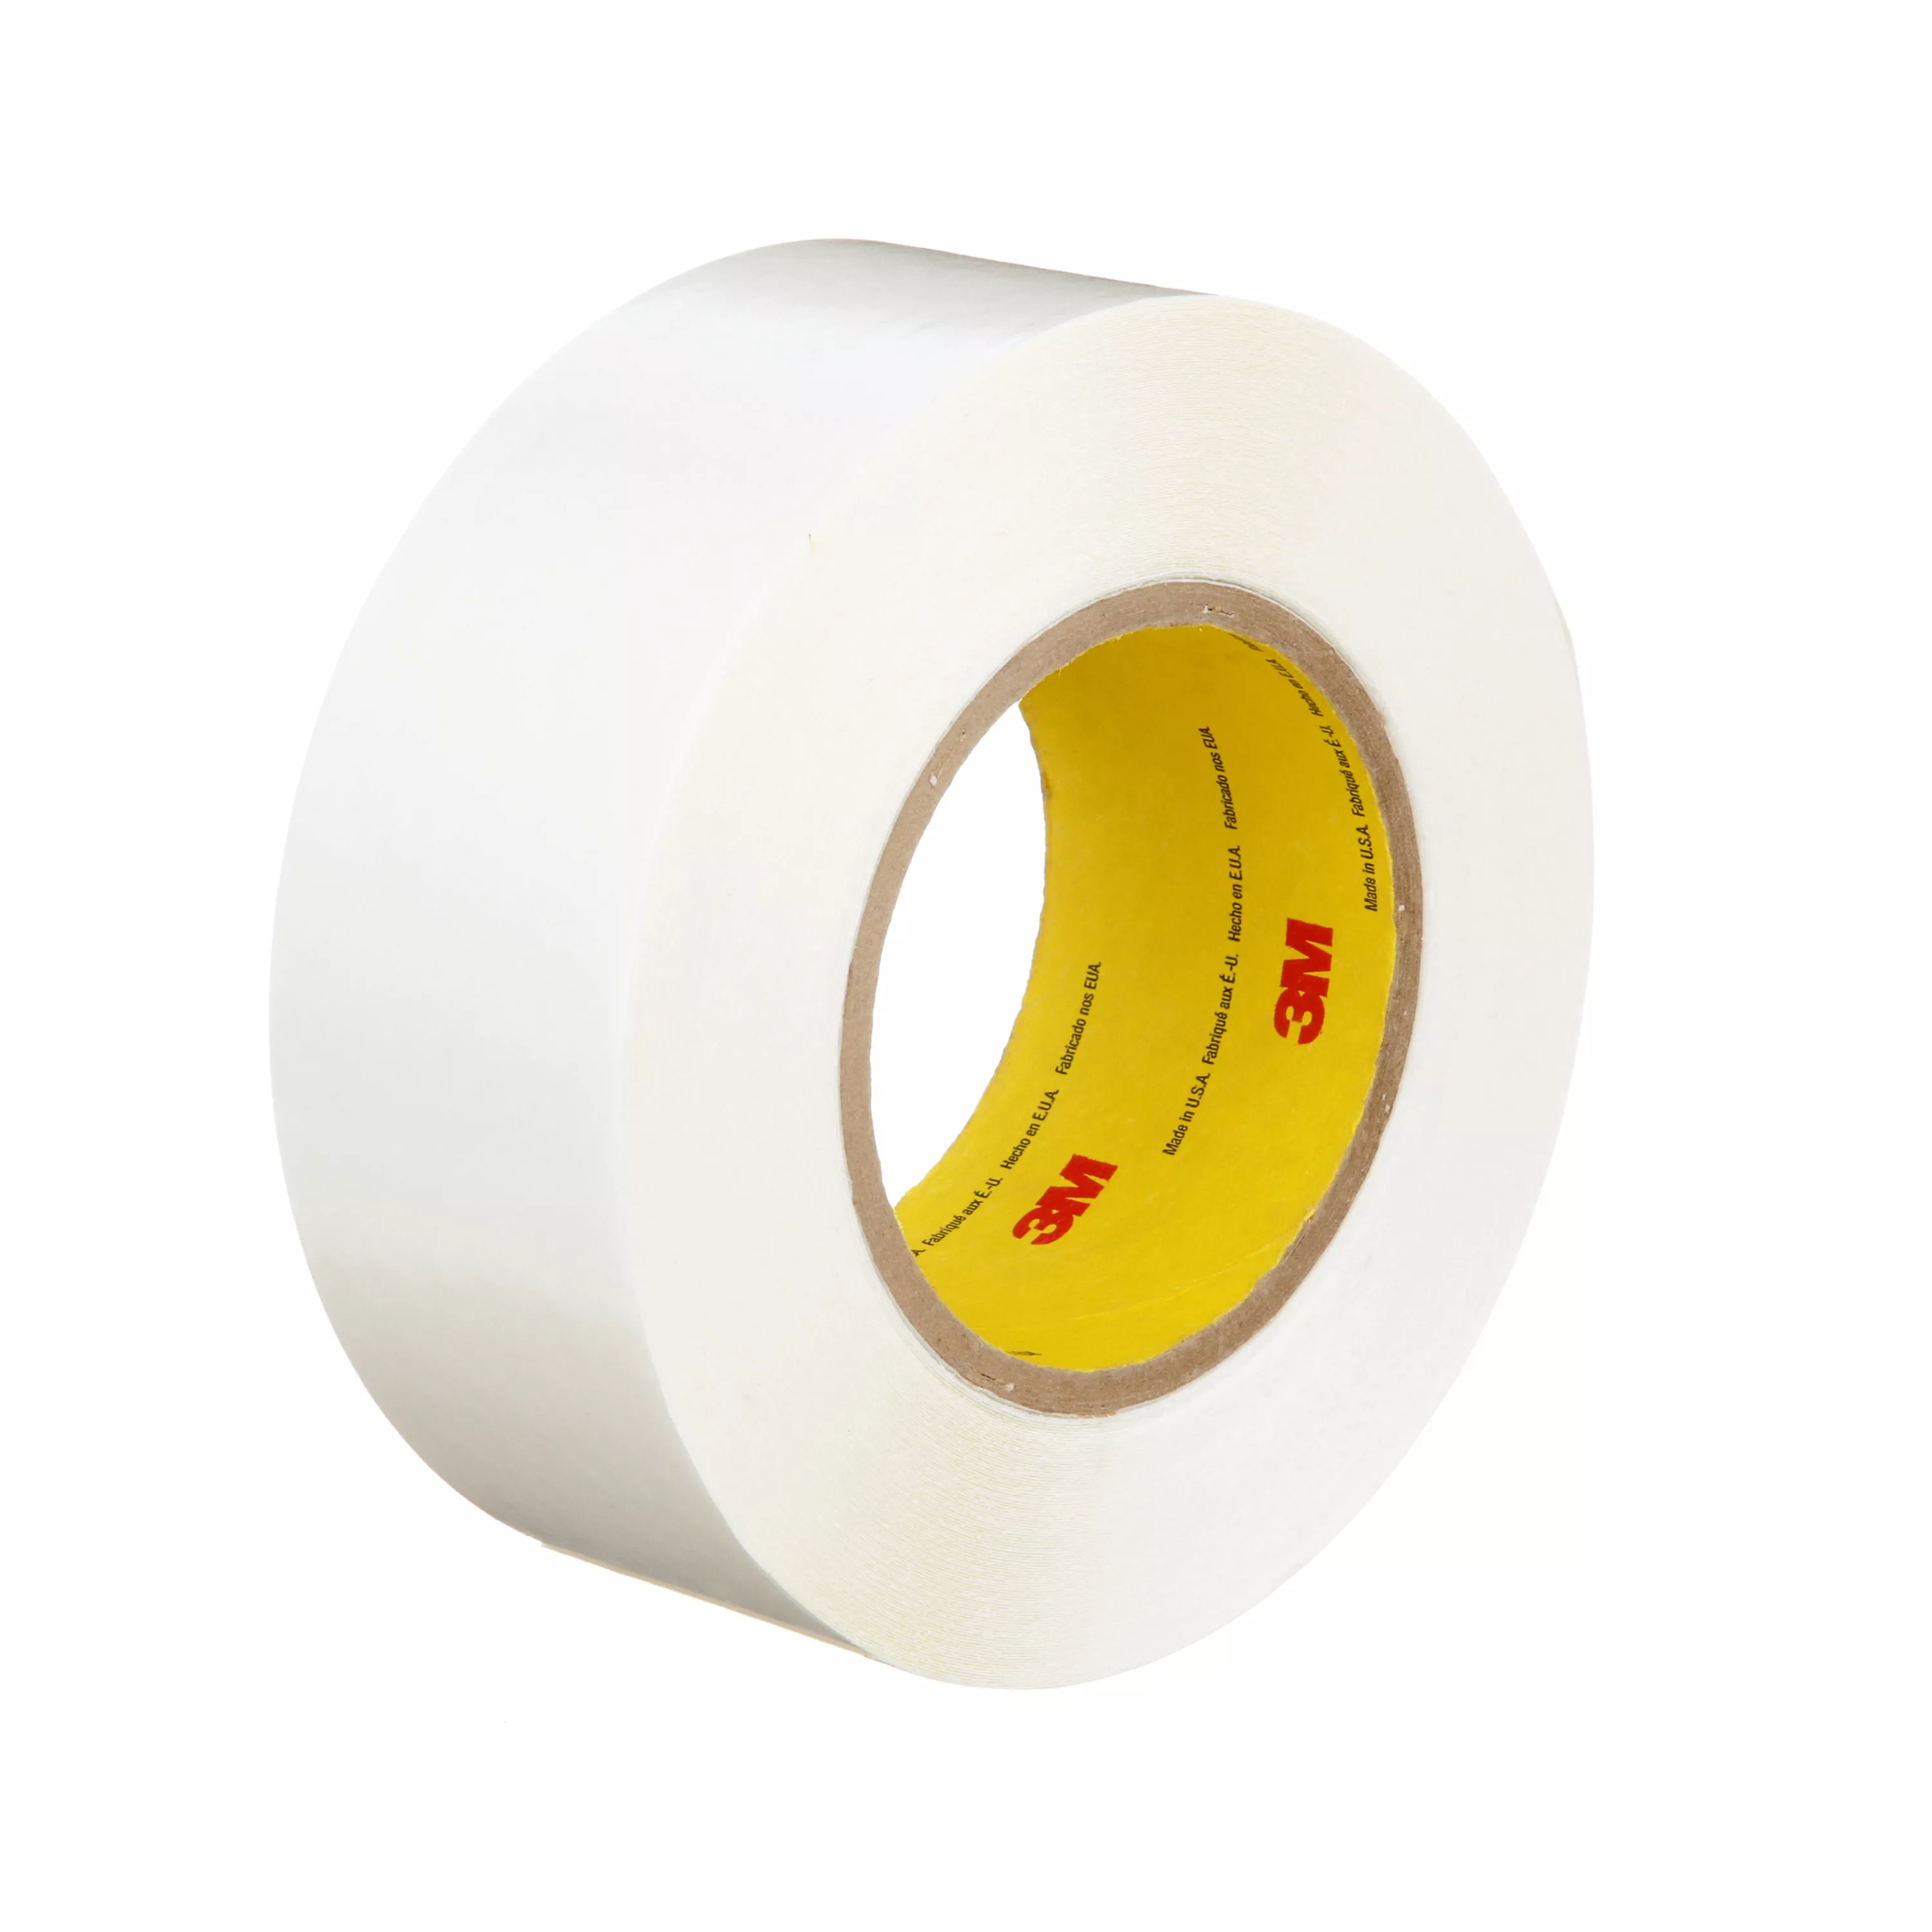 3M™ Double Coated Tape 9579, White, 2 in x 36 yd, 9 mil, 24 Roll/Case